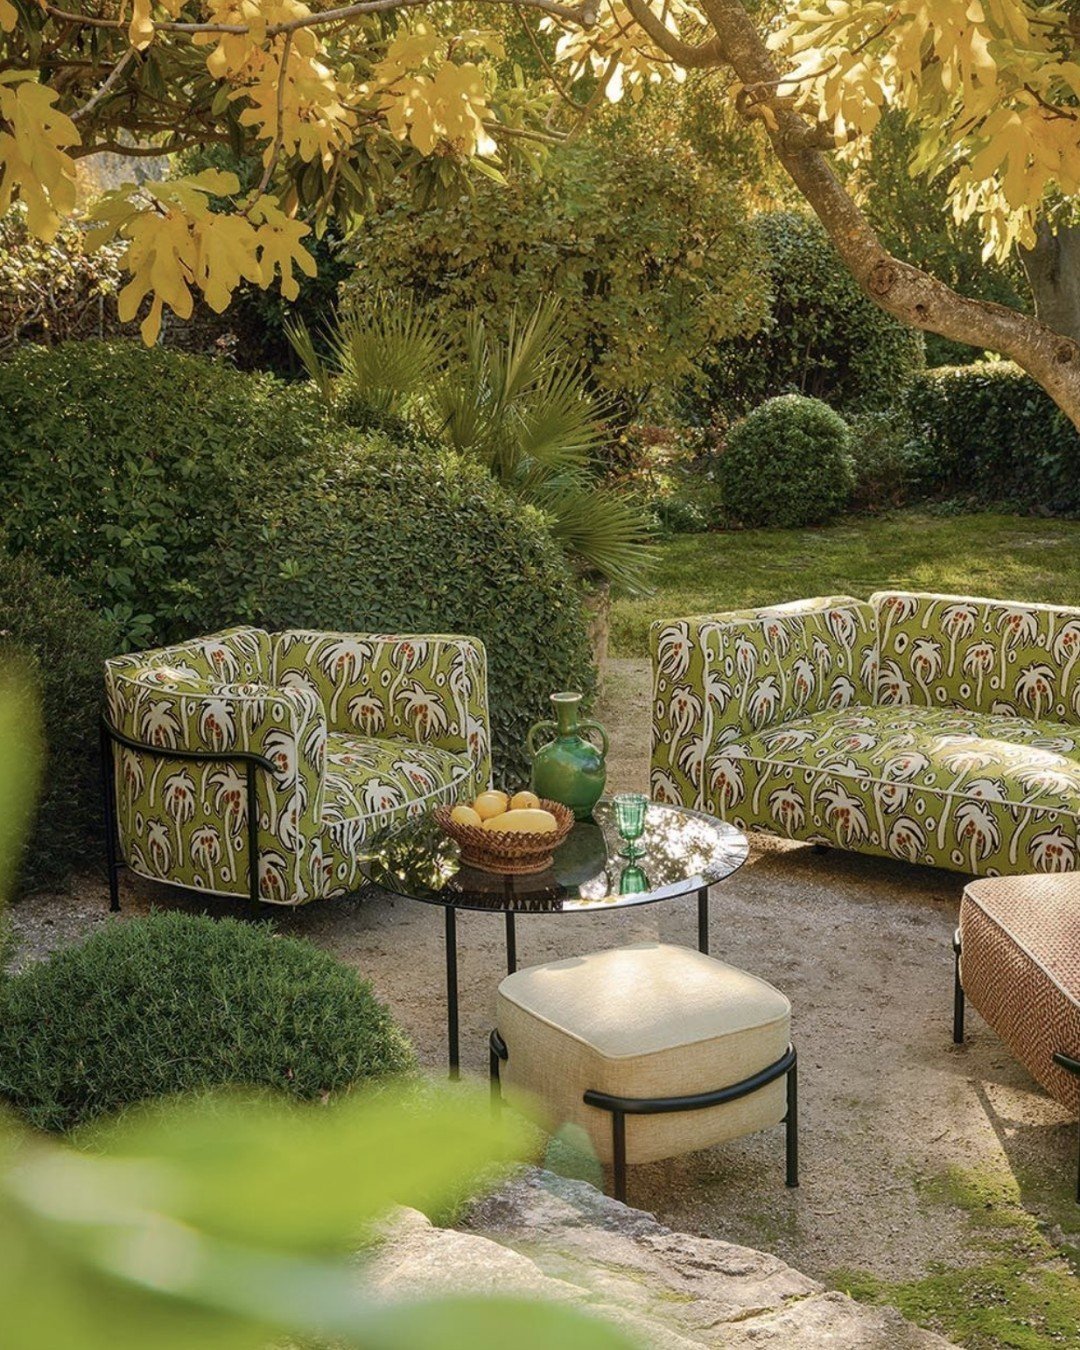 We are enjoying the outdoor living interior for the celebration of May Day 🌞

#WoolfWeeklyInspo selecting the @lamaisonpierrefrey - Bellagio high-performance outdoor collection for this Summer inspiration.
.
.
.
.
.
#WoolfWeeklyInspo #WoolfInteriors